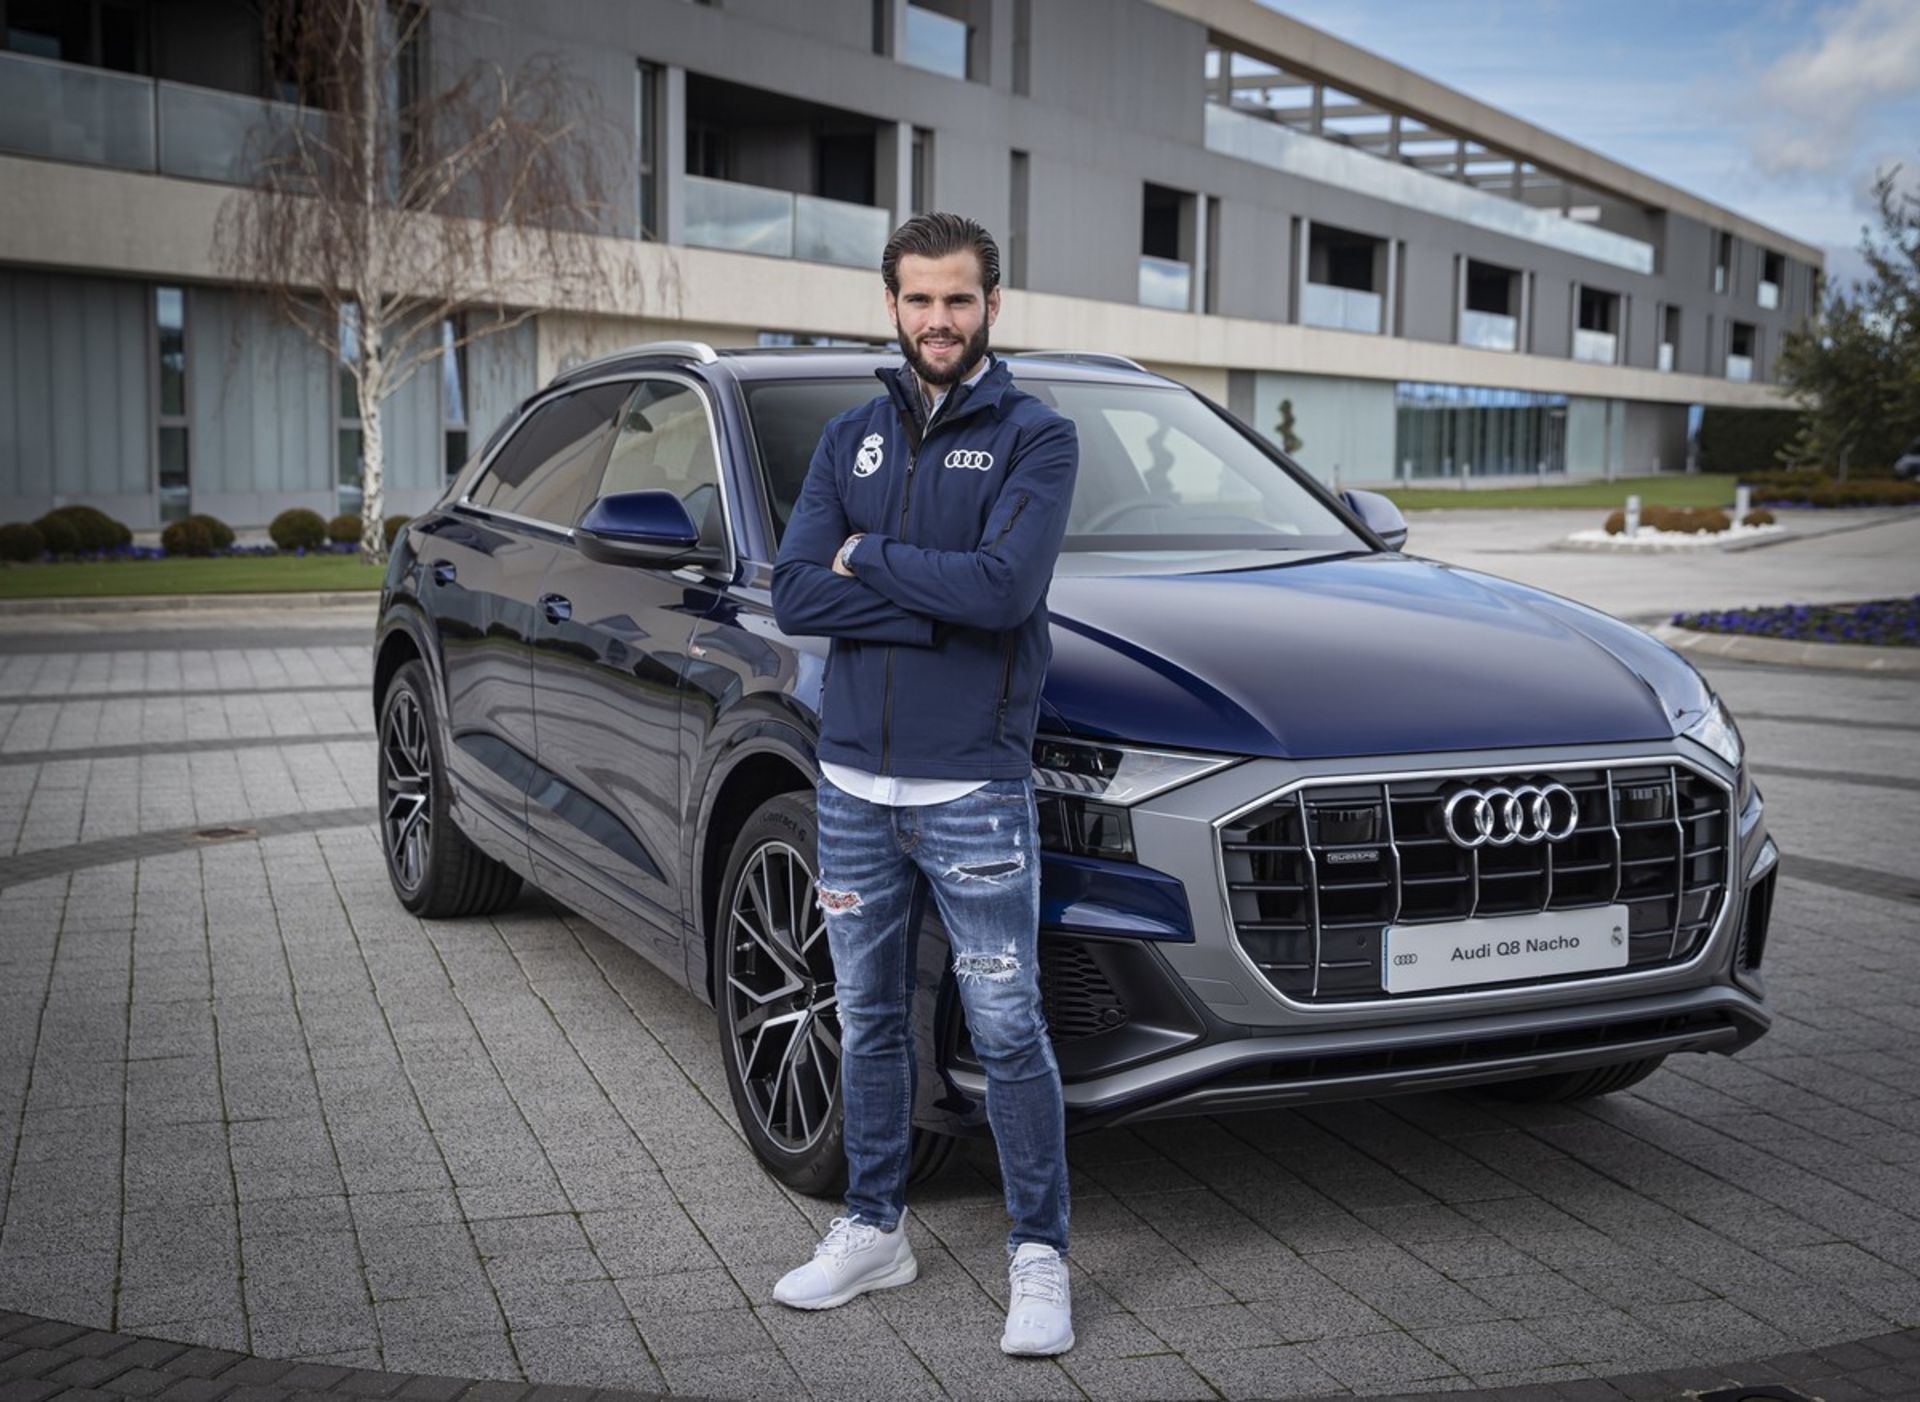 Real Madrid Players Take Delivery Of Their Free Audi Cars